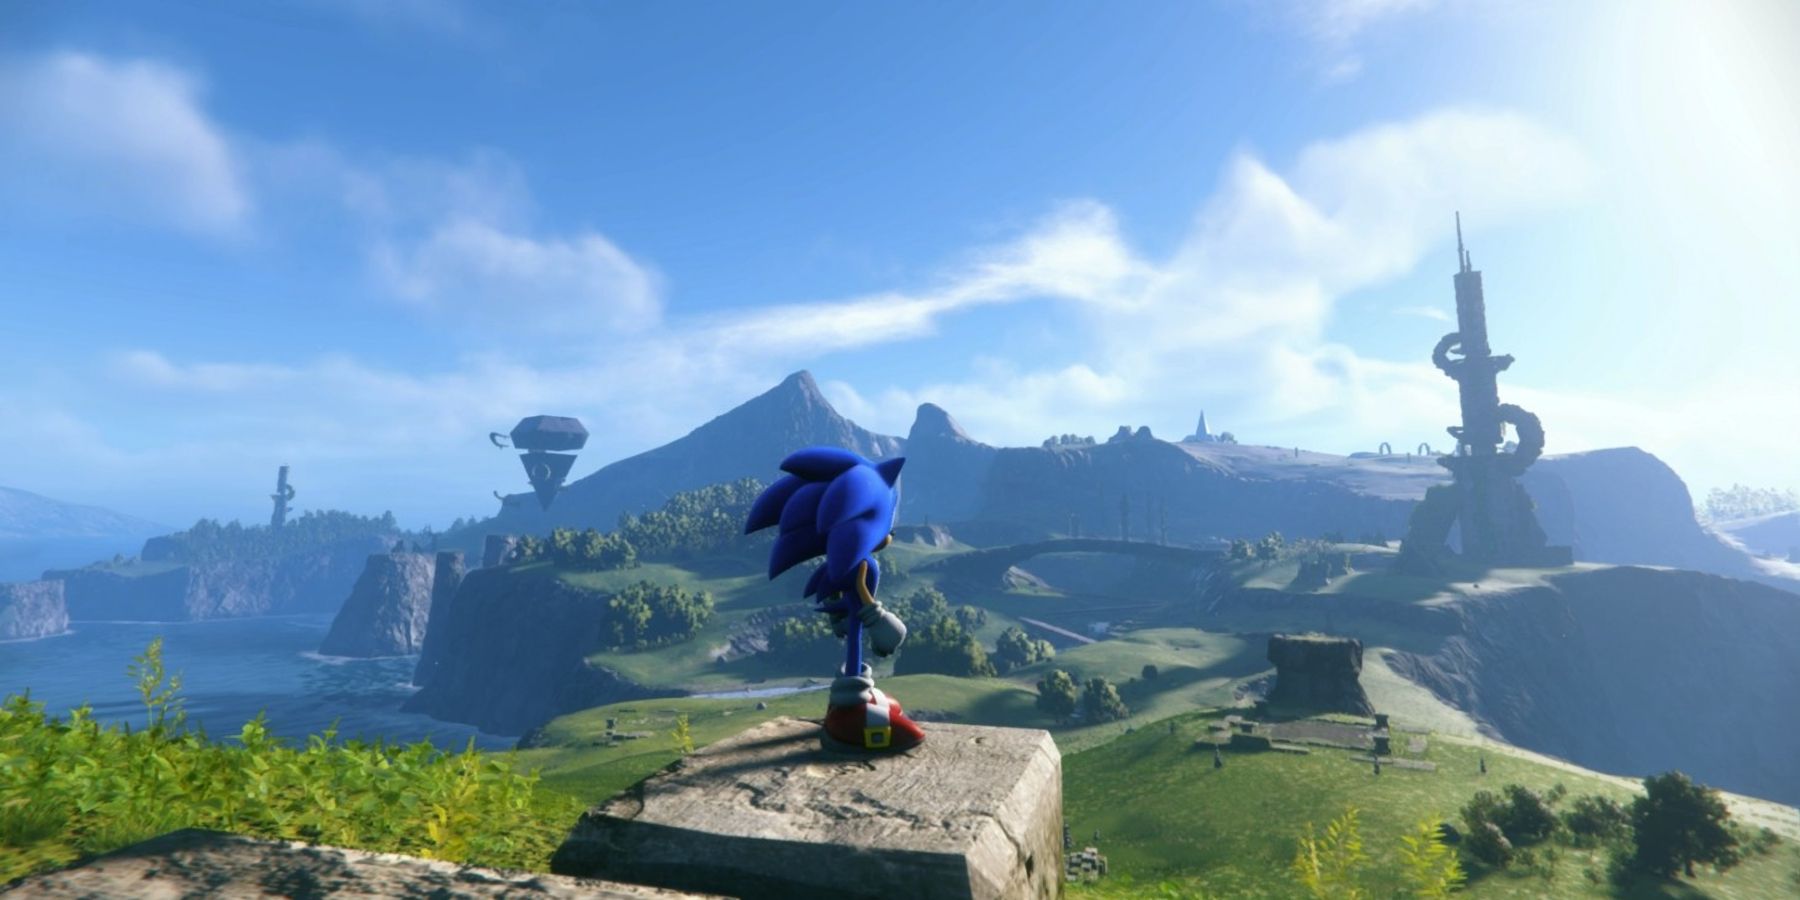 sonic looking at the open world